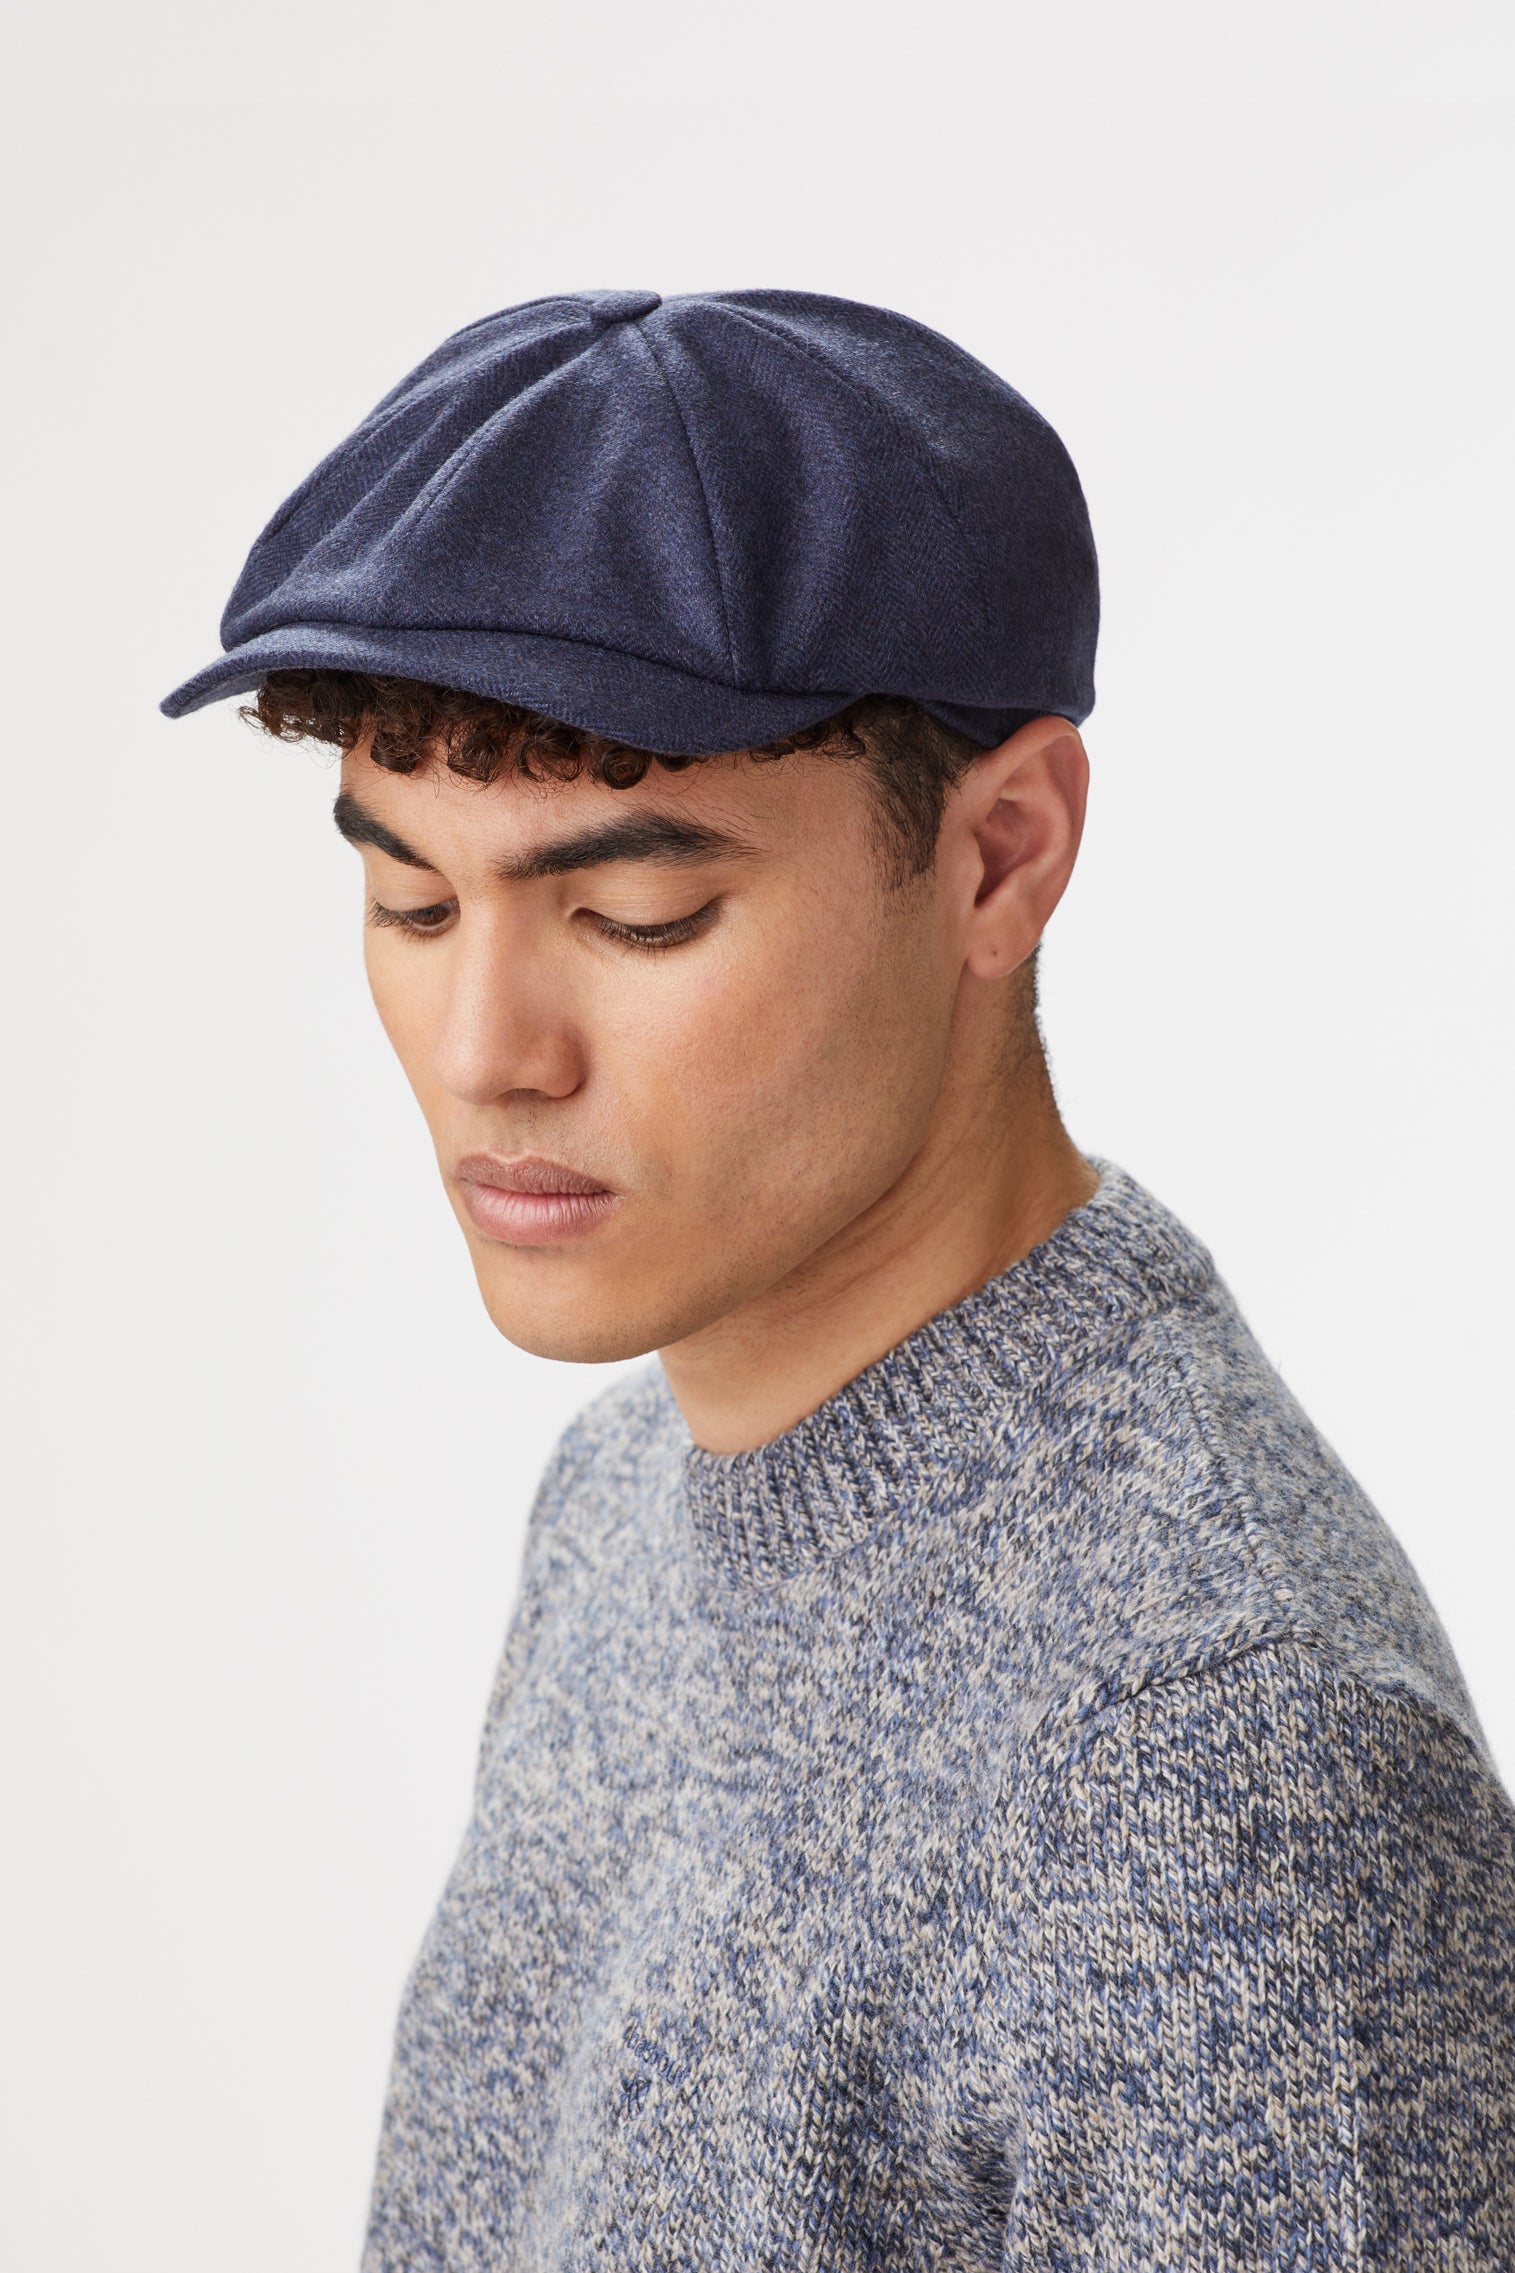 Cashmere Newsboy Cap - Hats for Oval Face Shapes - Lock & Co. Hatters London UK